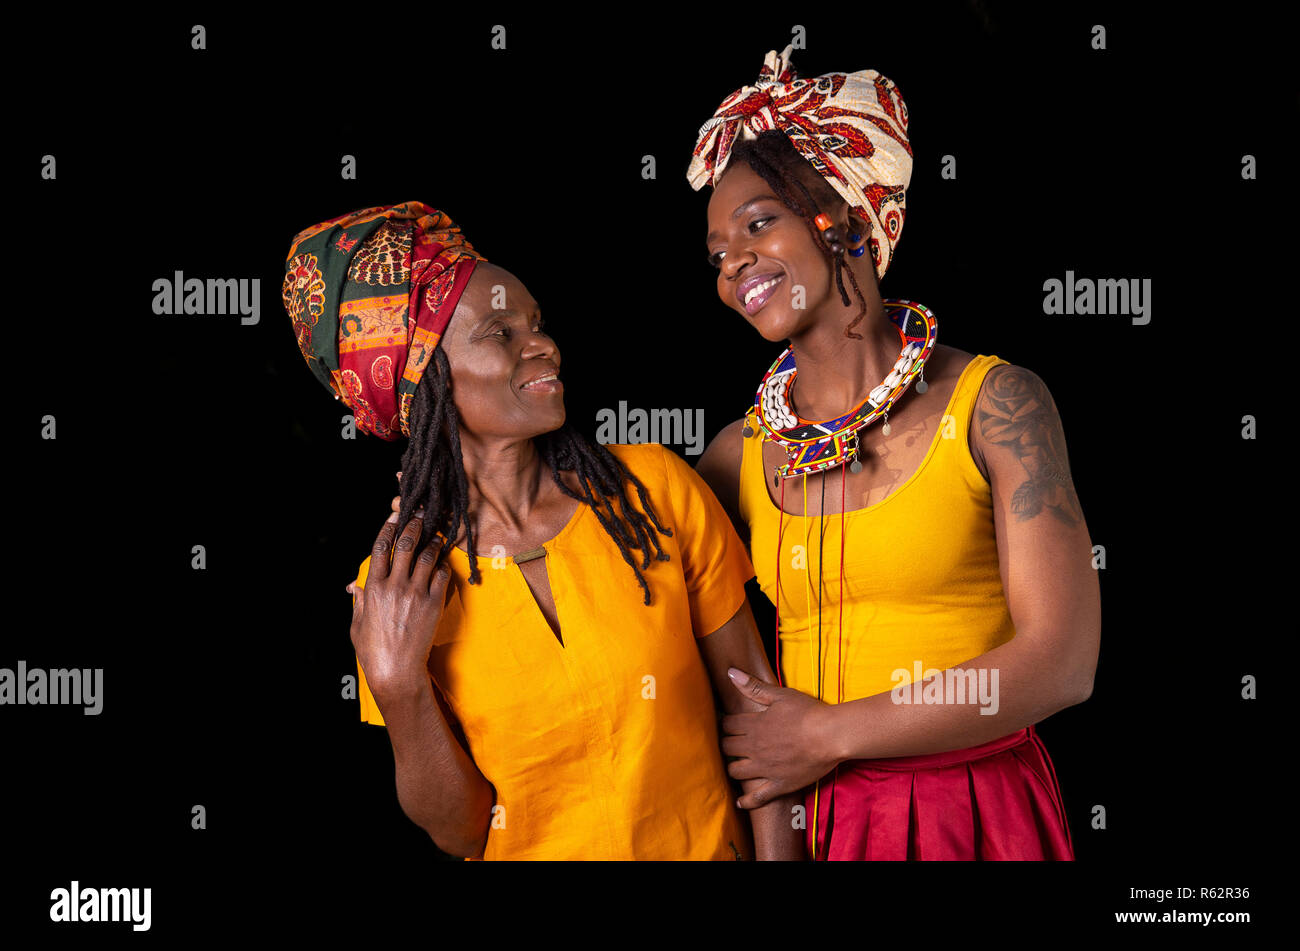 An African mother and daughter standing close together against a black background Stock Photo